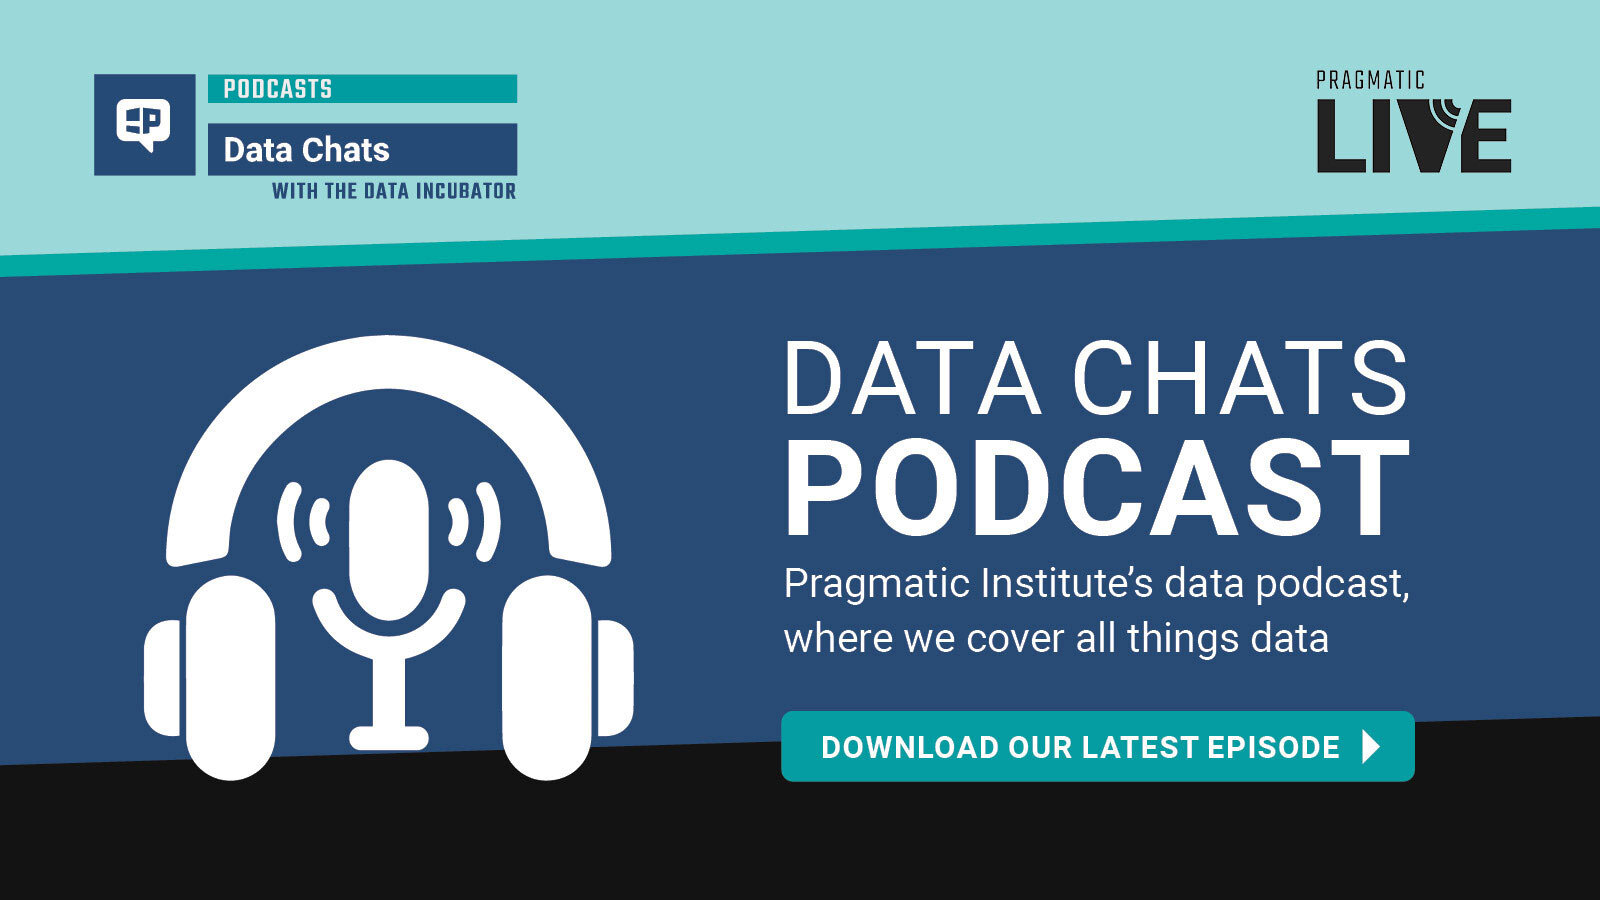 data_chats_podcast_by_pragmatic_institute_and_the_data_incubator